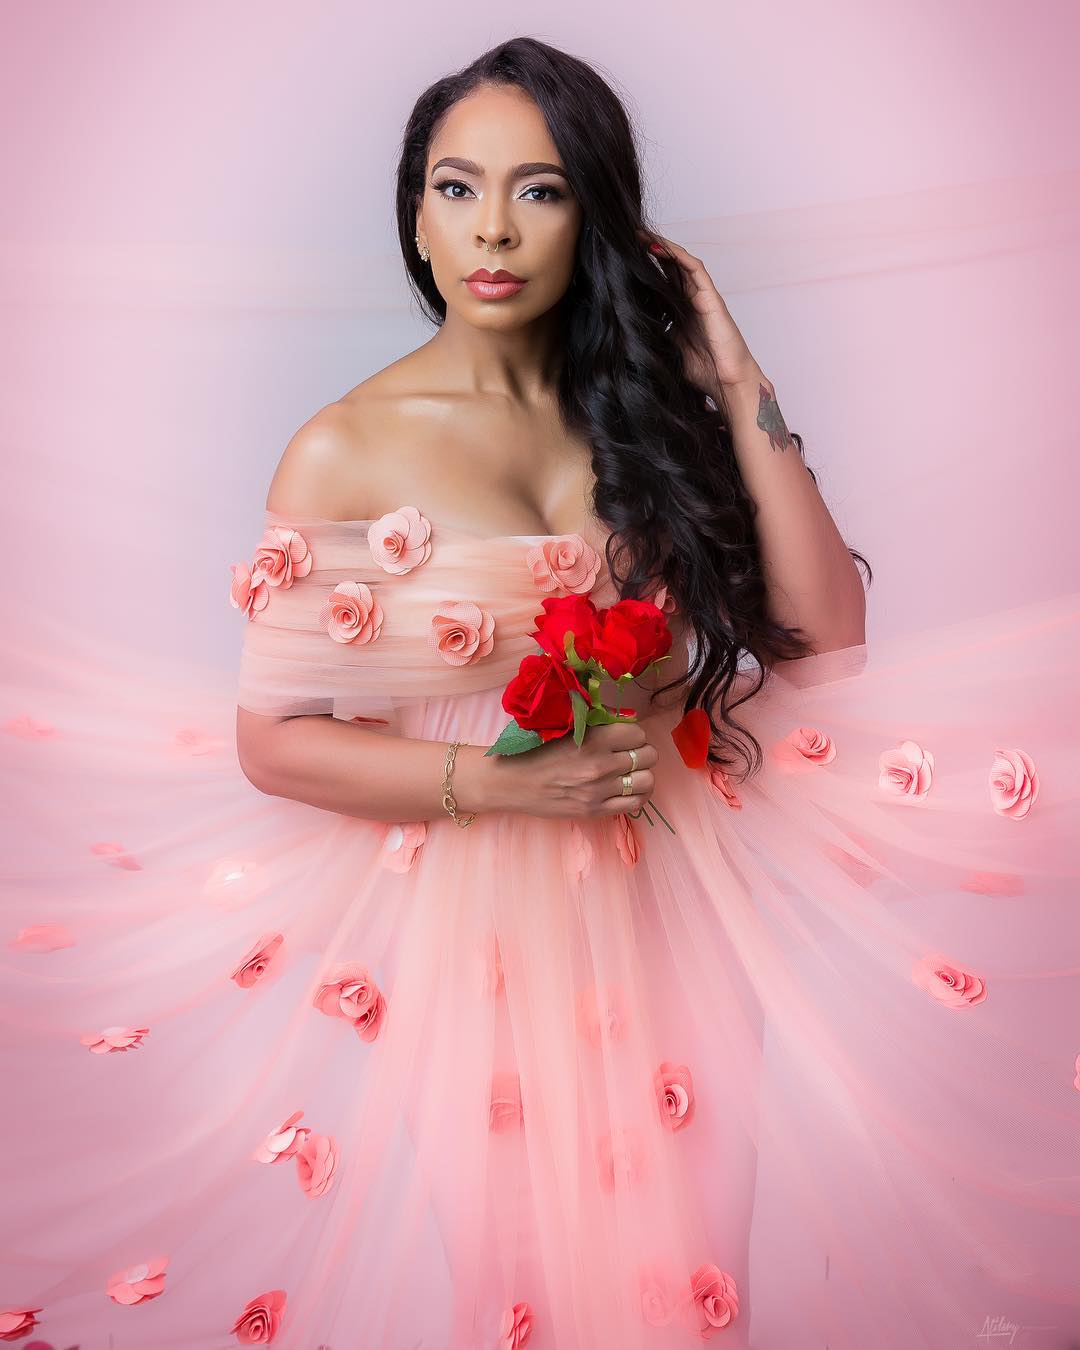 TBoss Gorgeous In Valentine's Day Themed Photo Shoot